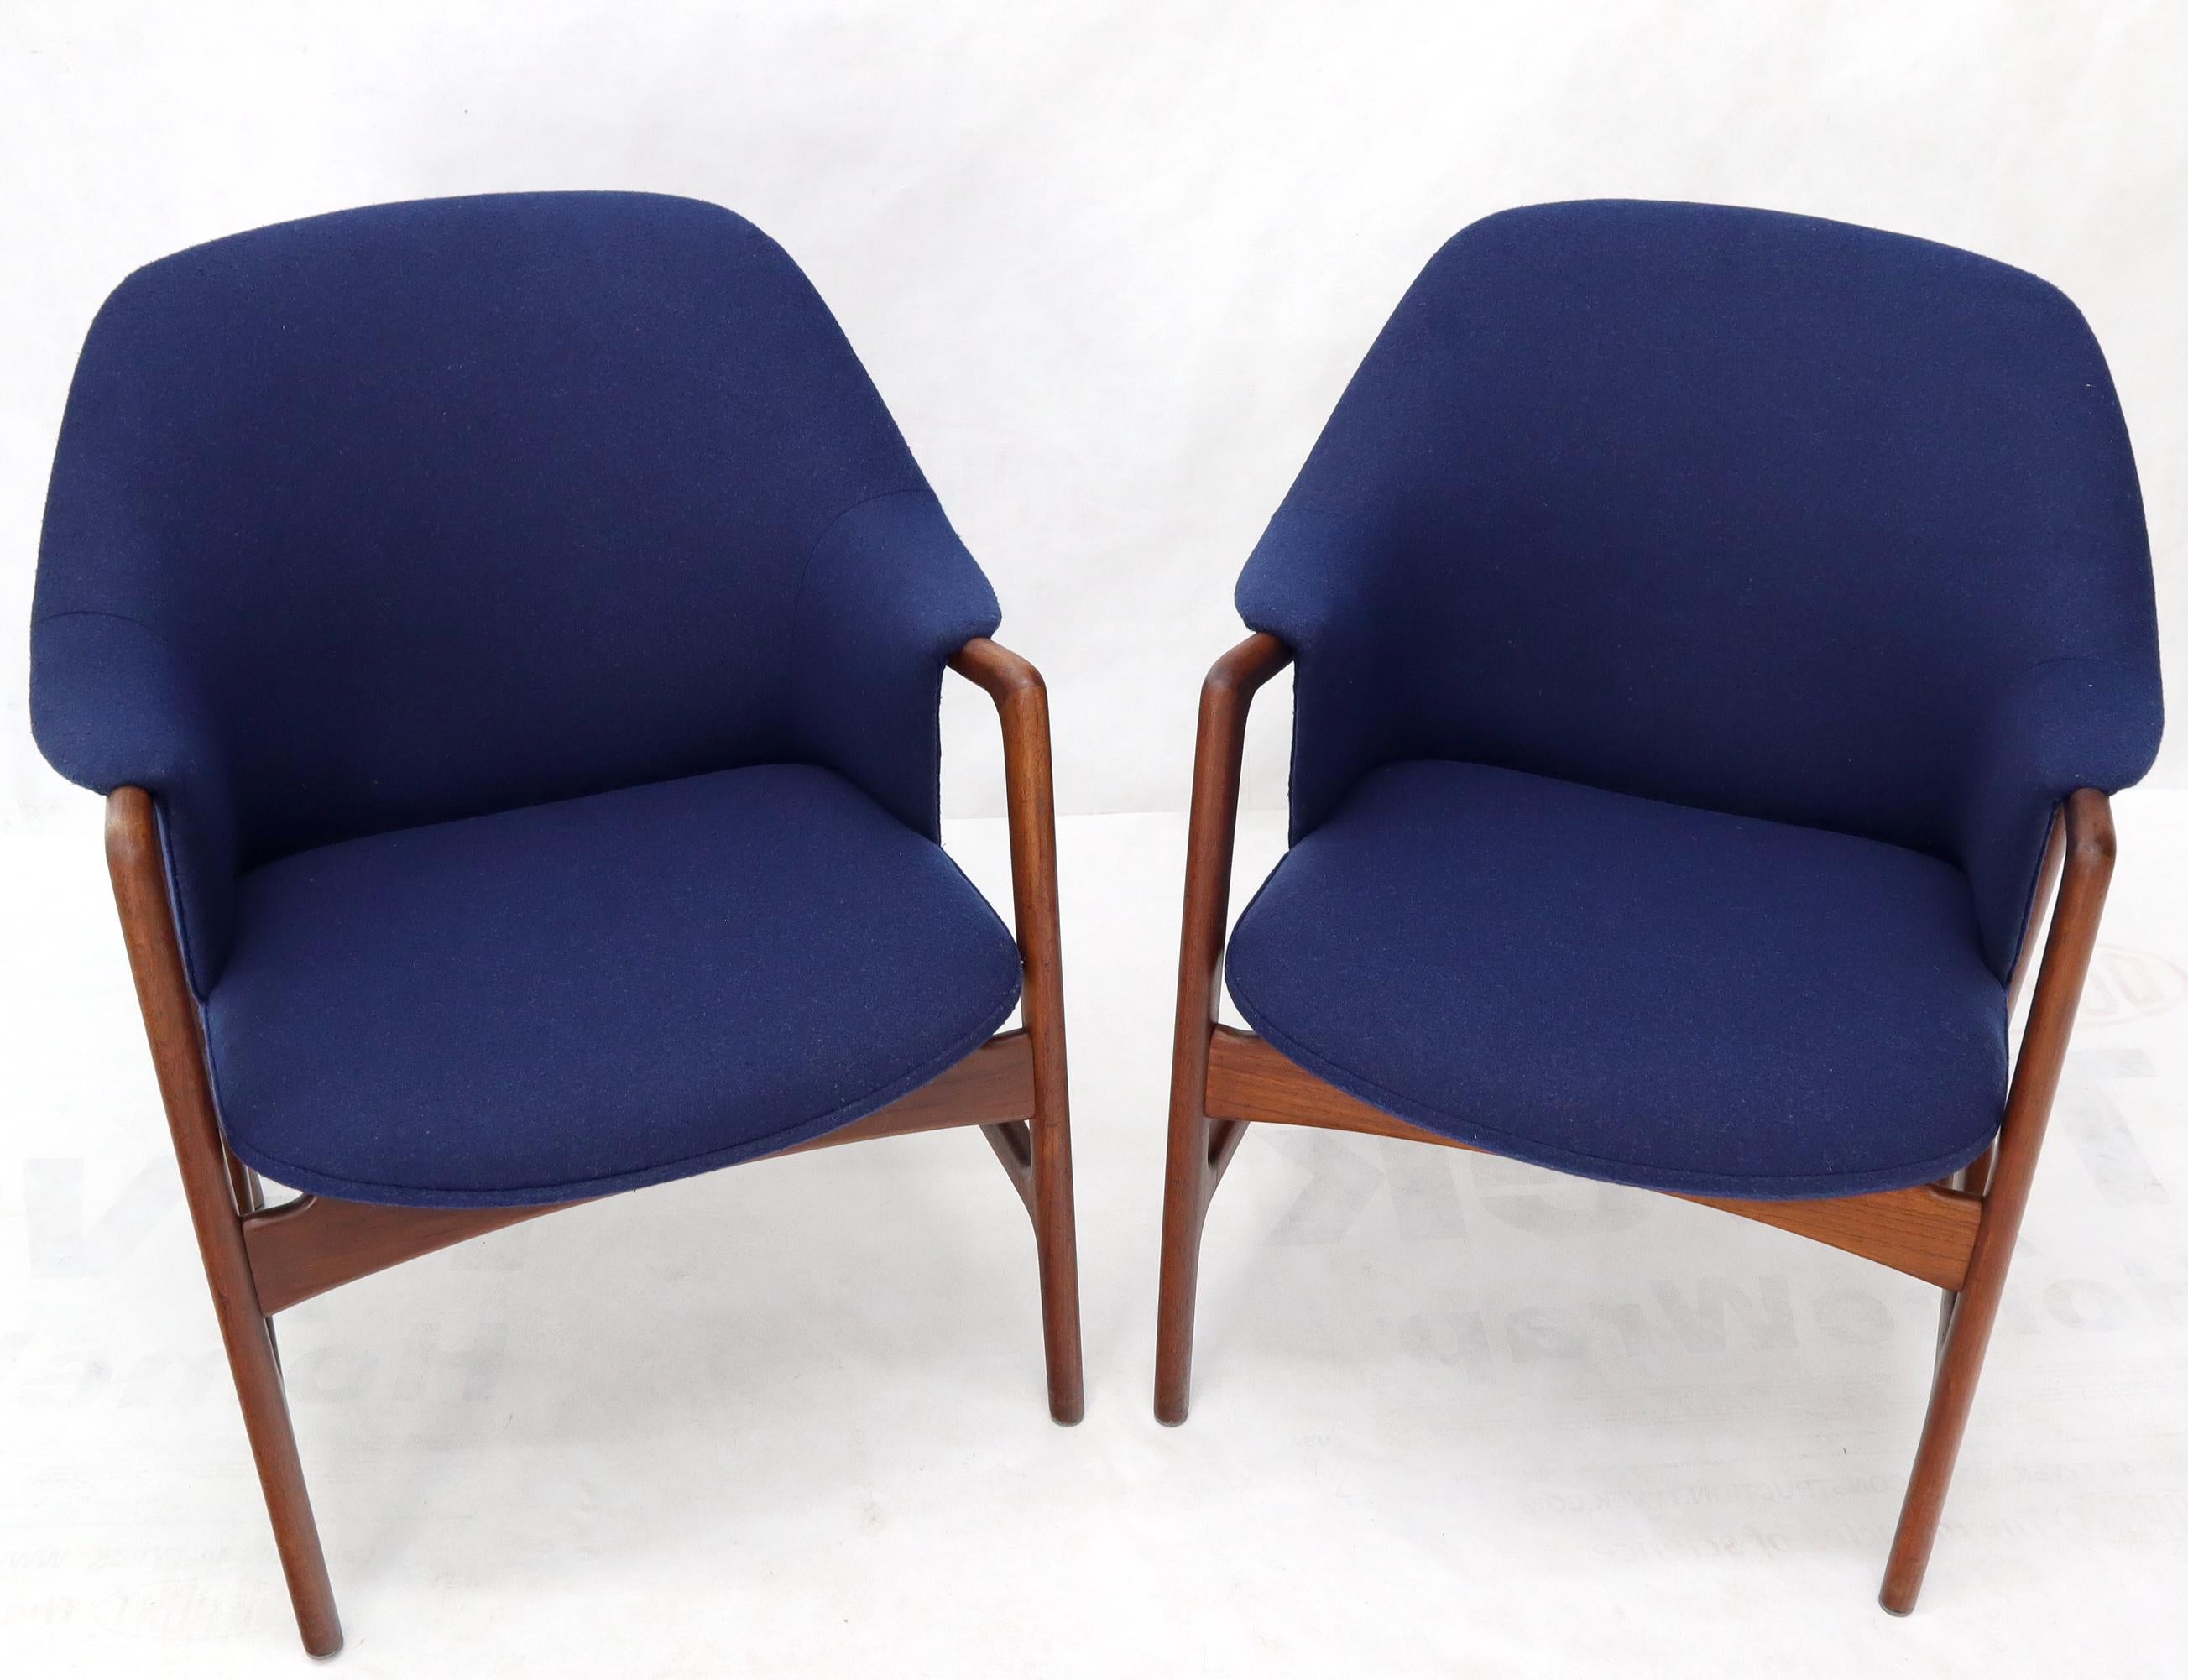 20th Century New Blue Wool Upholstery Teak Frames Danish Mid-Century Modern Lounge Chairs For Sale